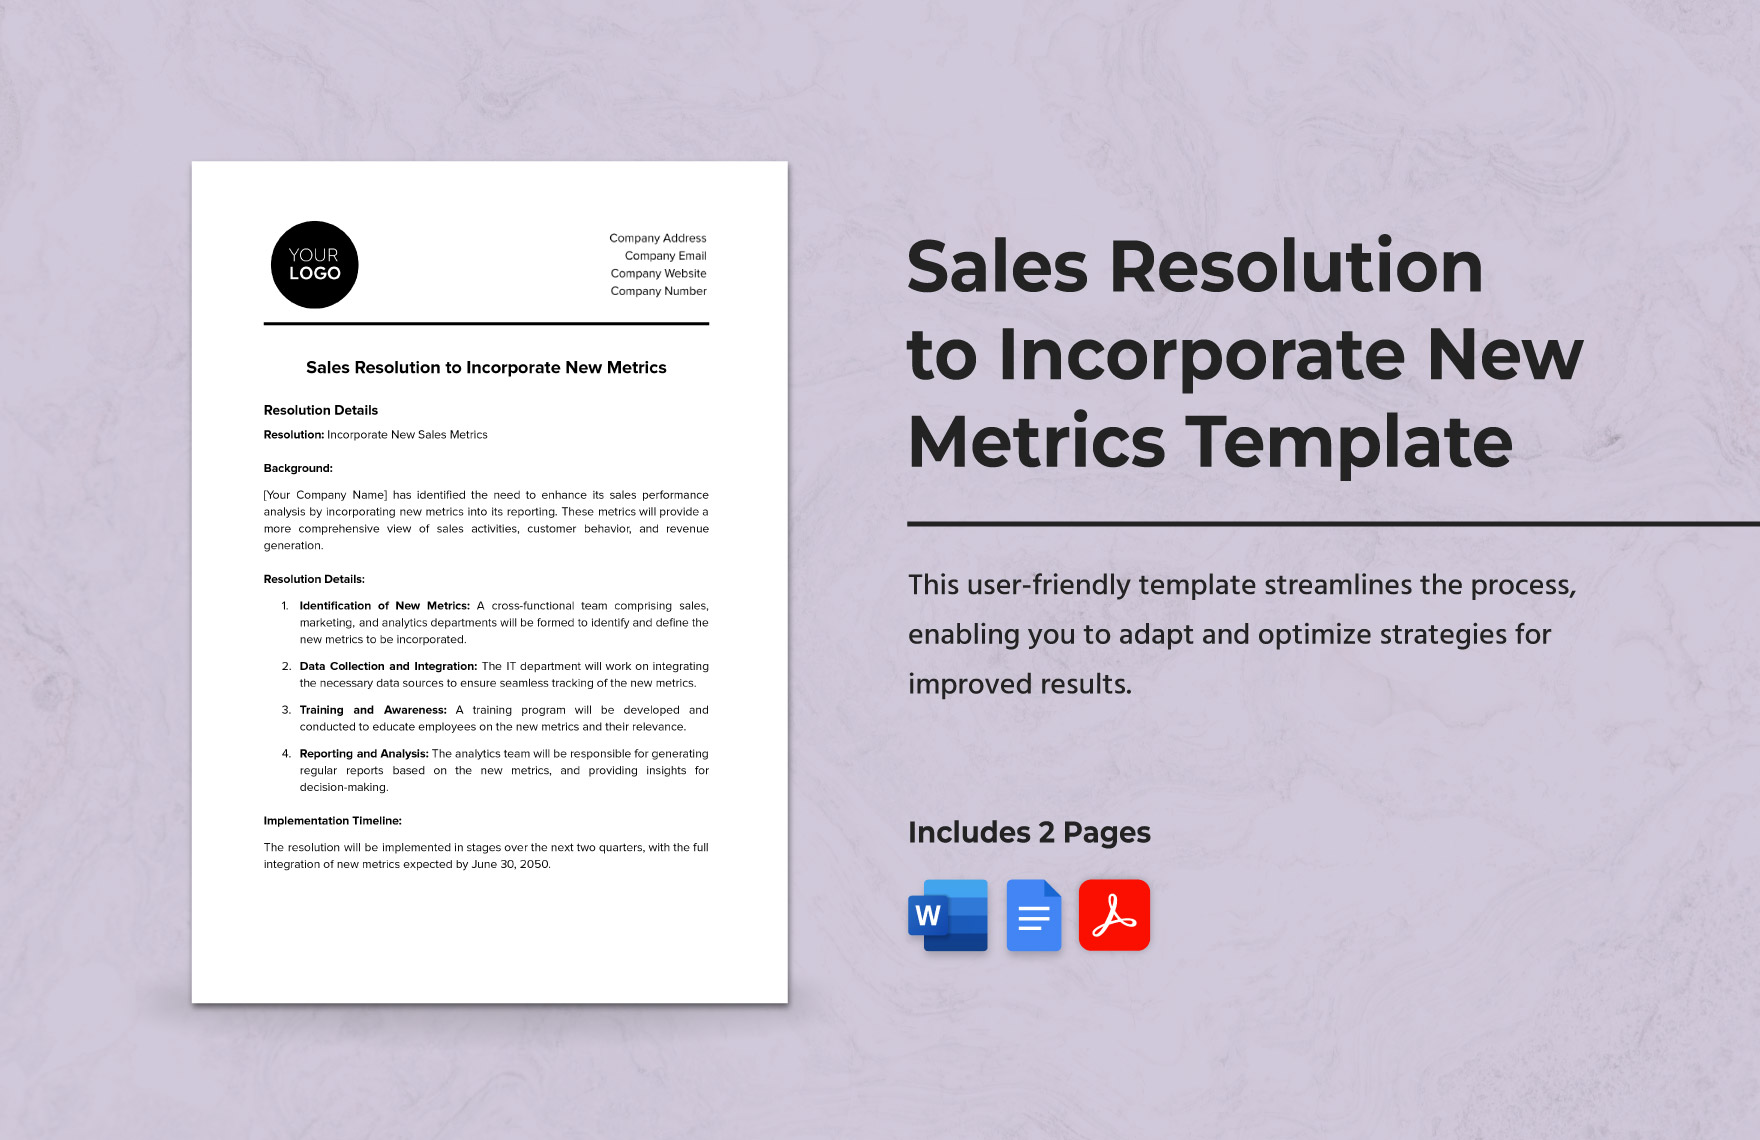 Sales Resolution to Incorporate New Metrics Template